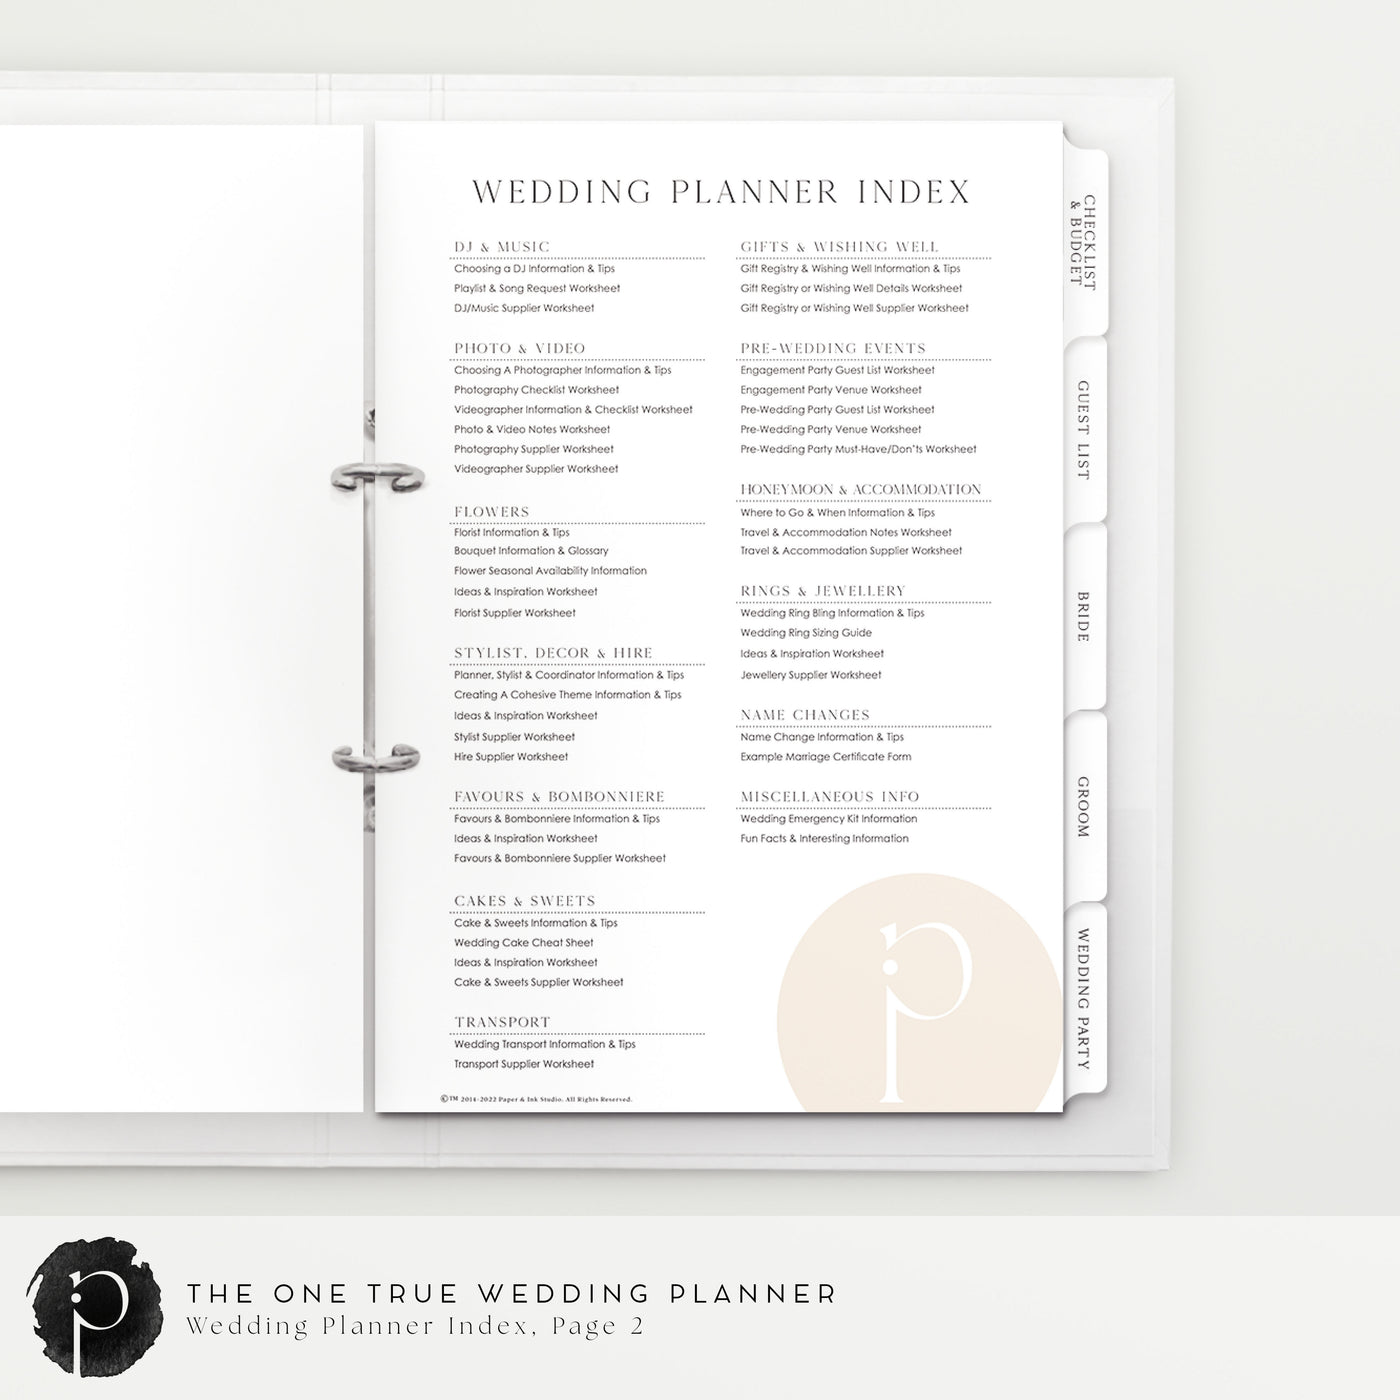 An example image of the seond index page of the wedding planner and organiser made by Paper and Ink Studio, with a list of all the wedding information and wedding planning tools included in it.